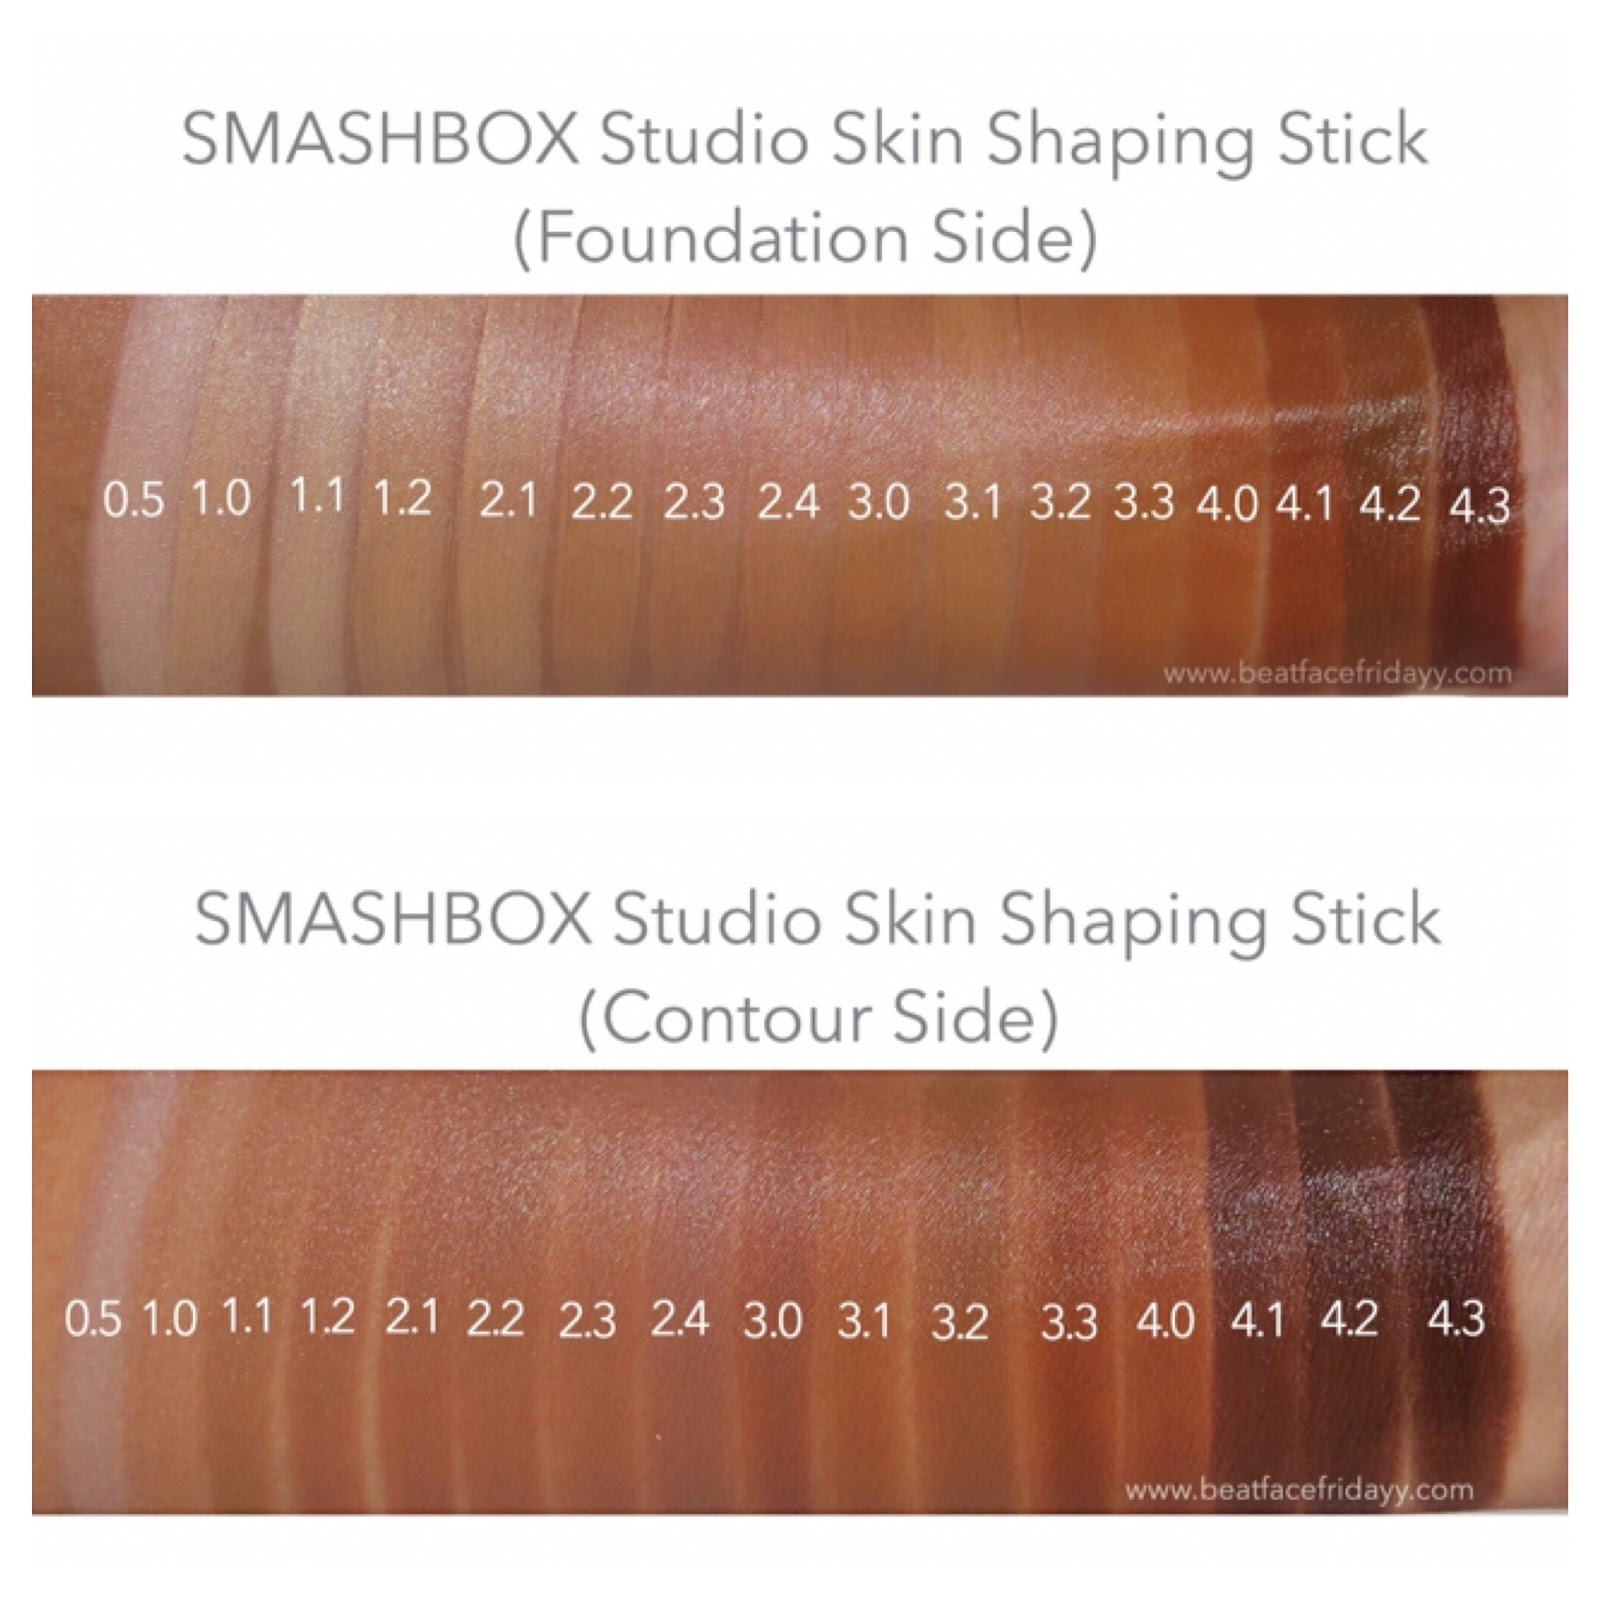 new-prod-smashbox-studio-skin-shaping-foundation-stick-foundation-with-swatches-of-all-16